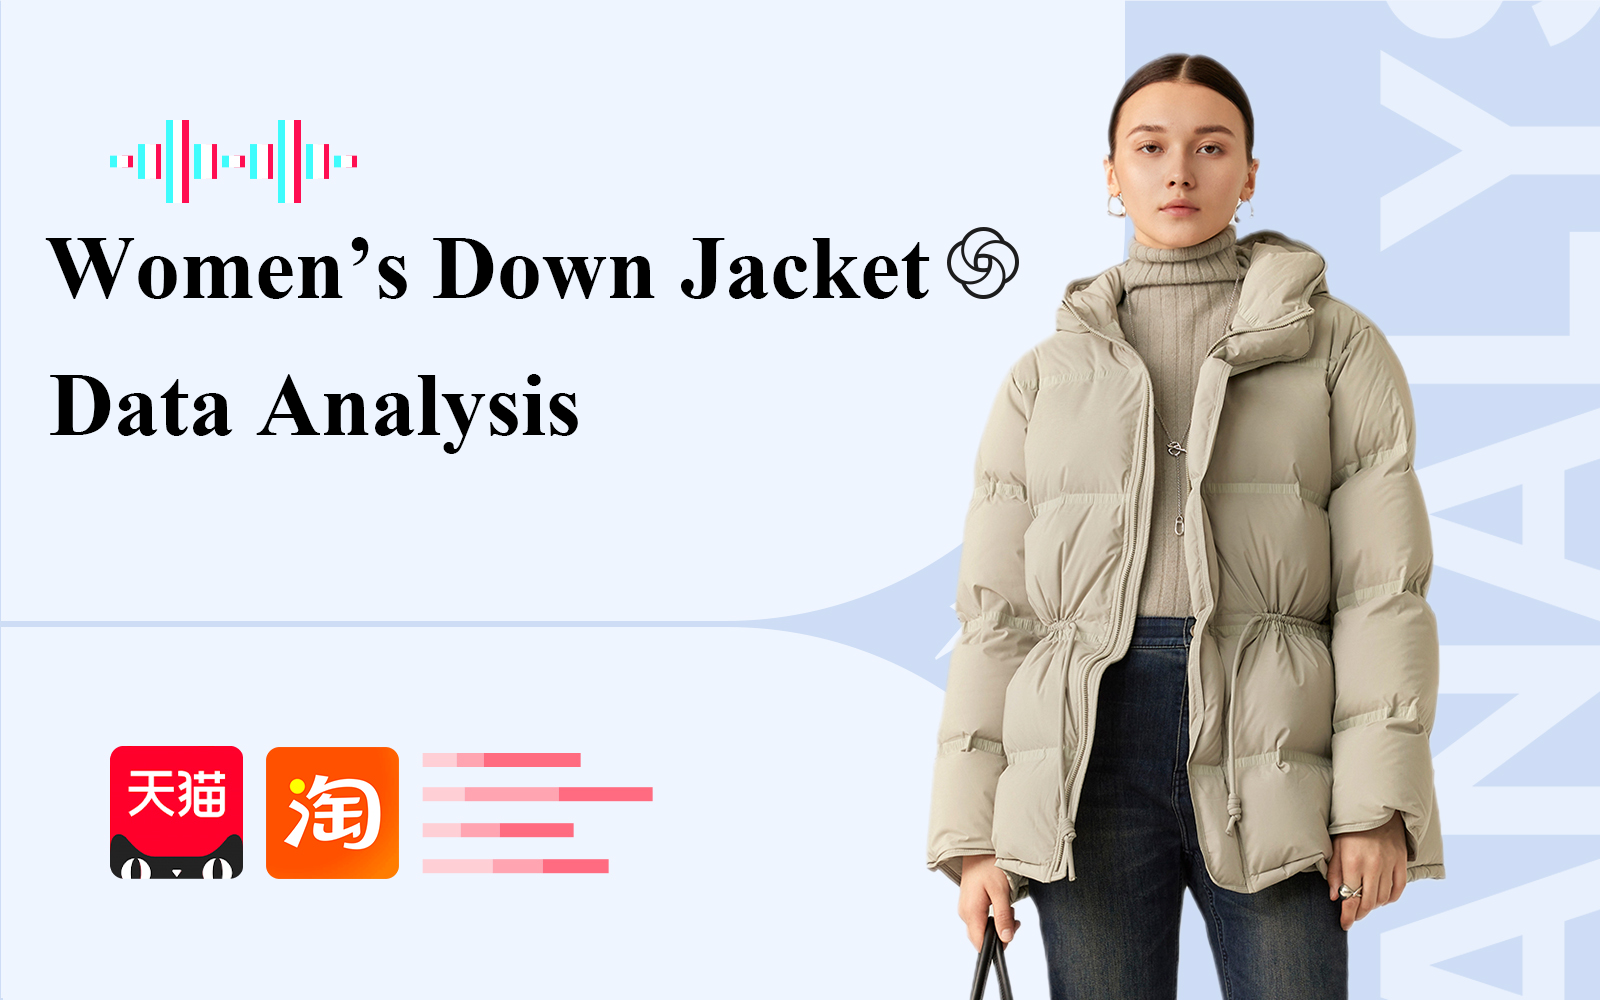 Down Jacket -- The Data Analysis of E-Commerce Womenswear